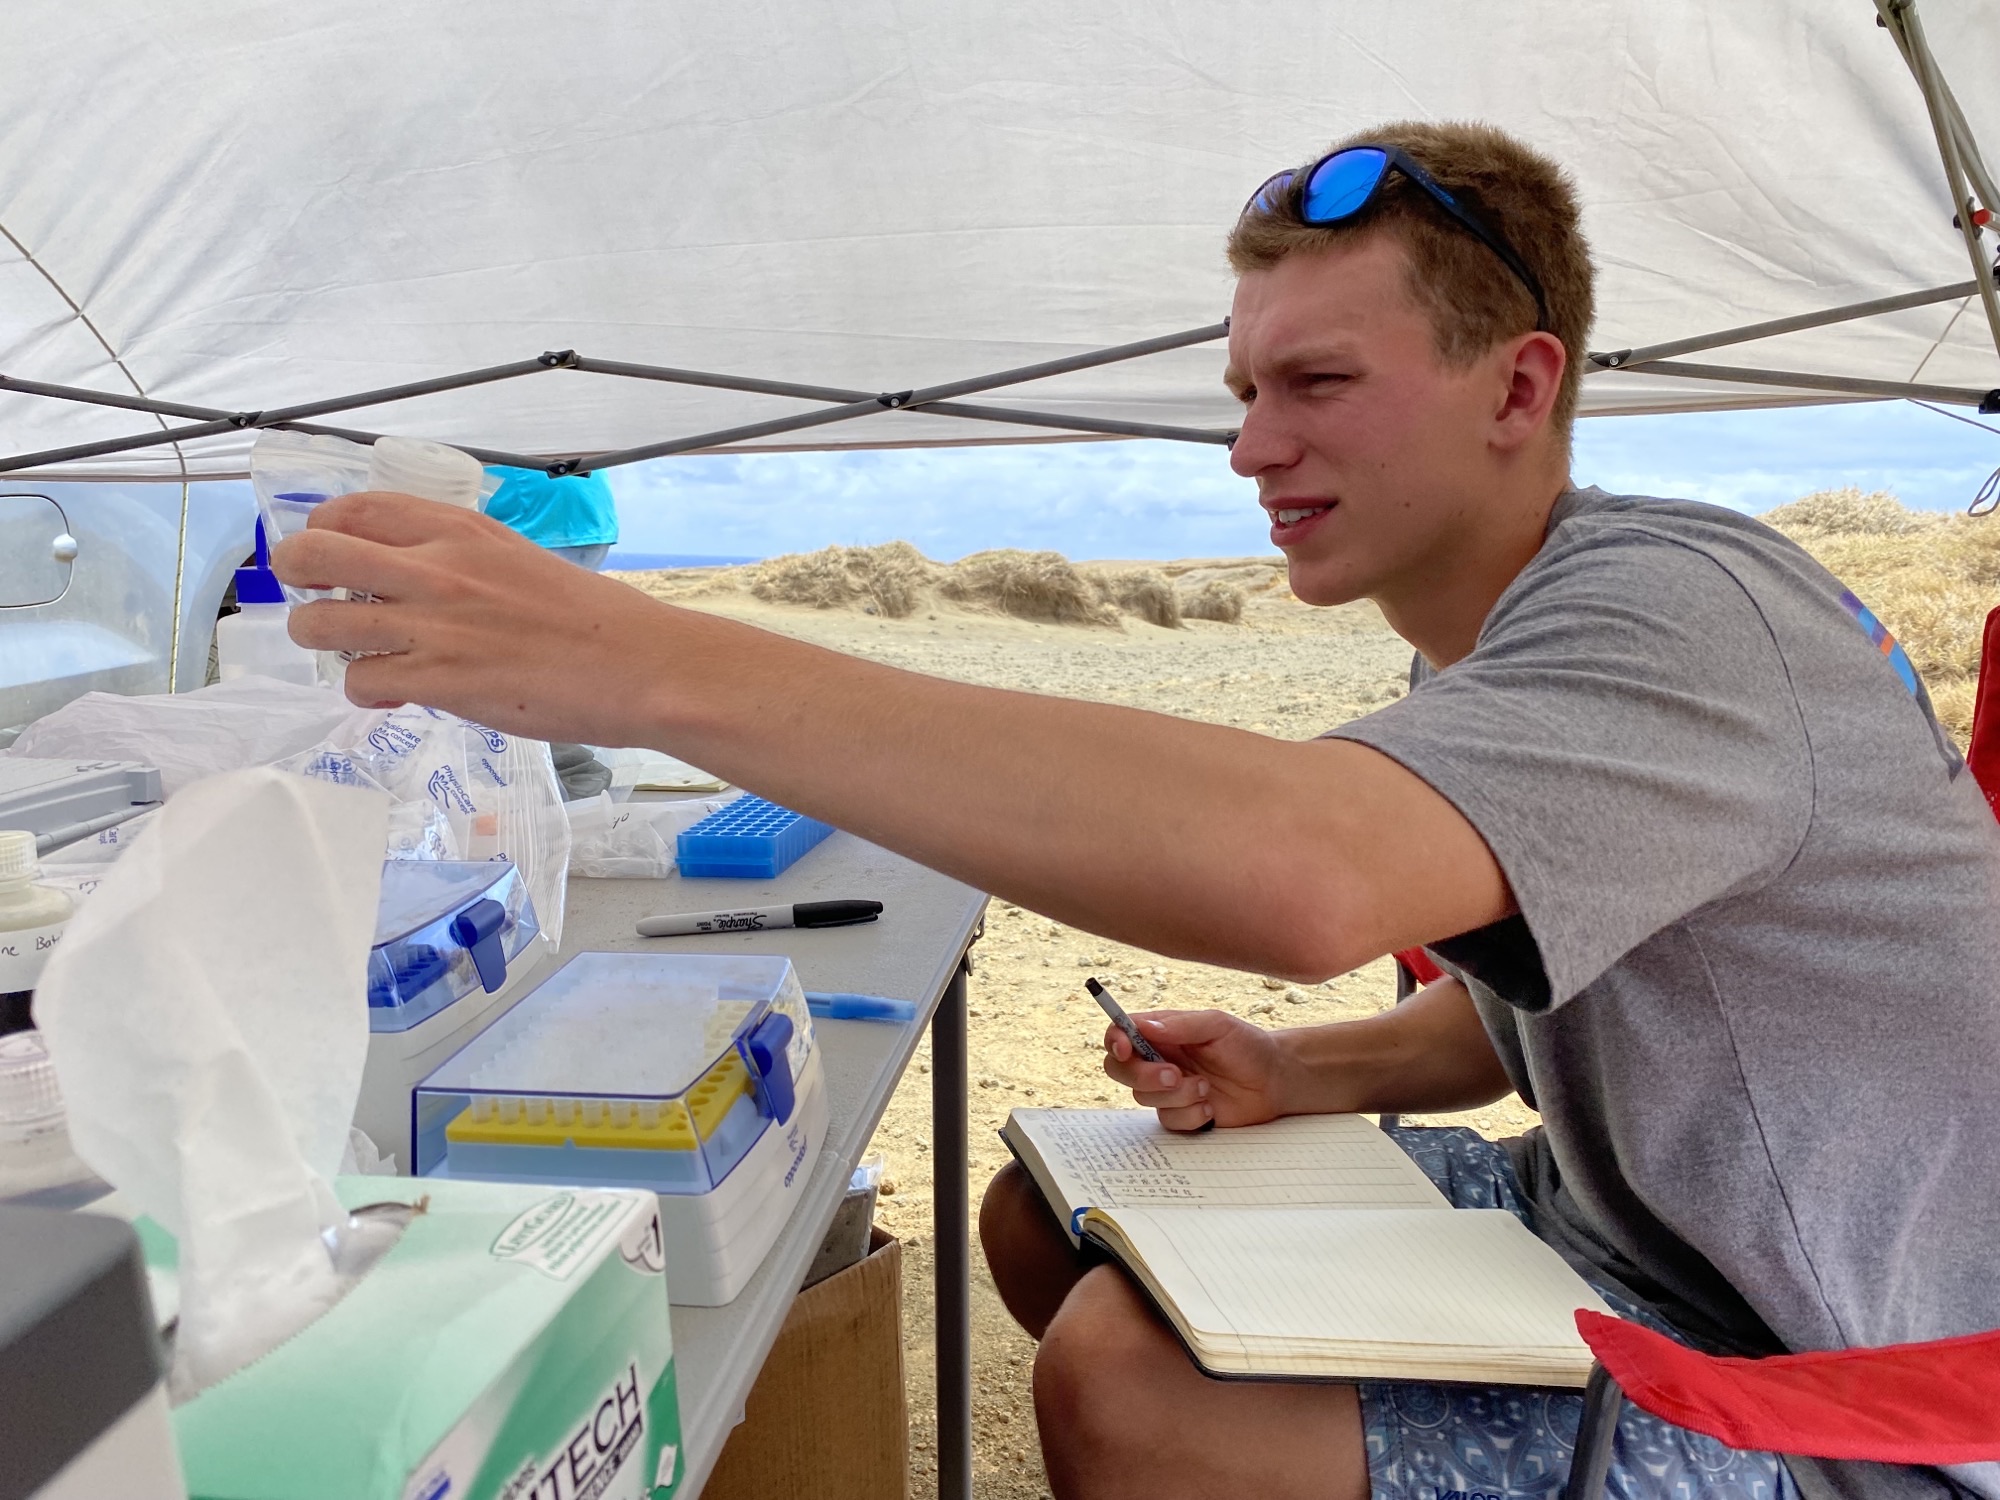 Student uses a measuring tool to process ocean water samples in Hawaii